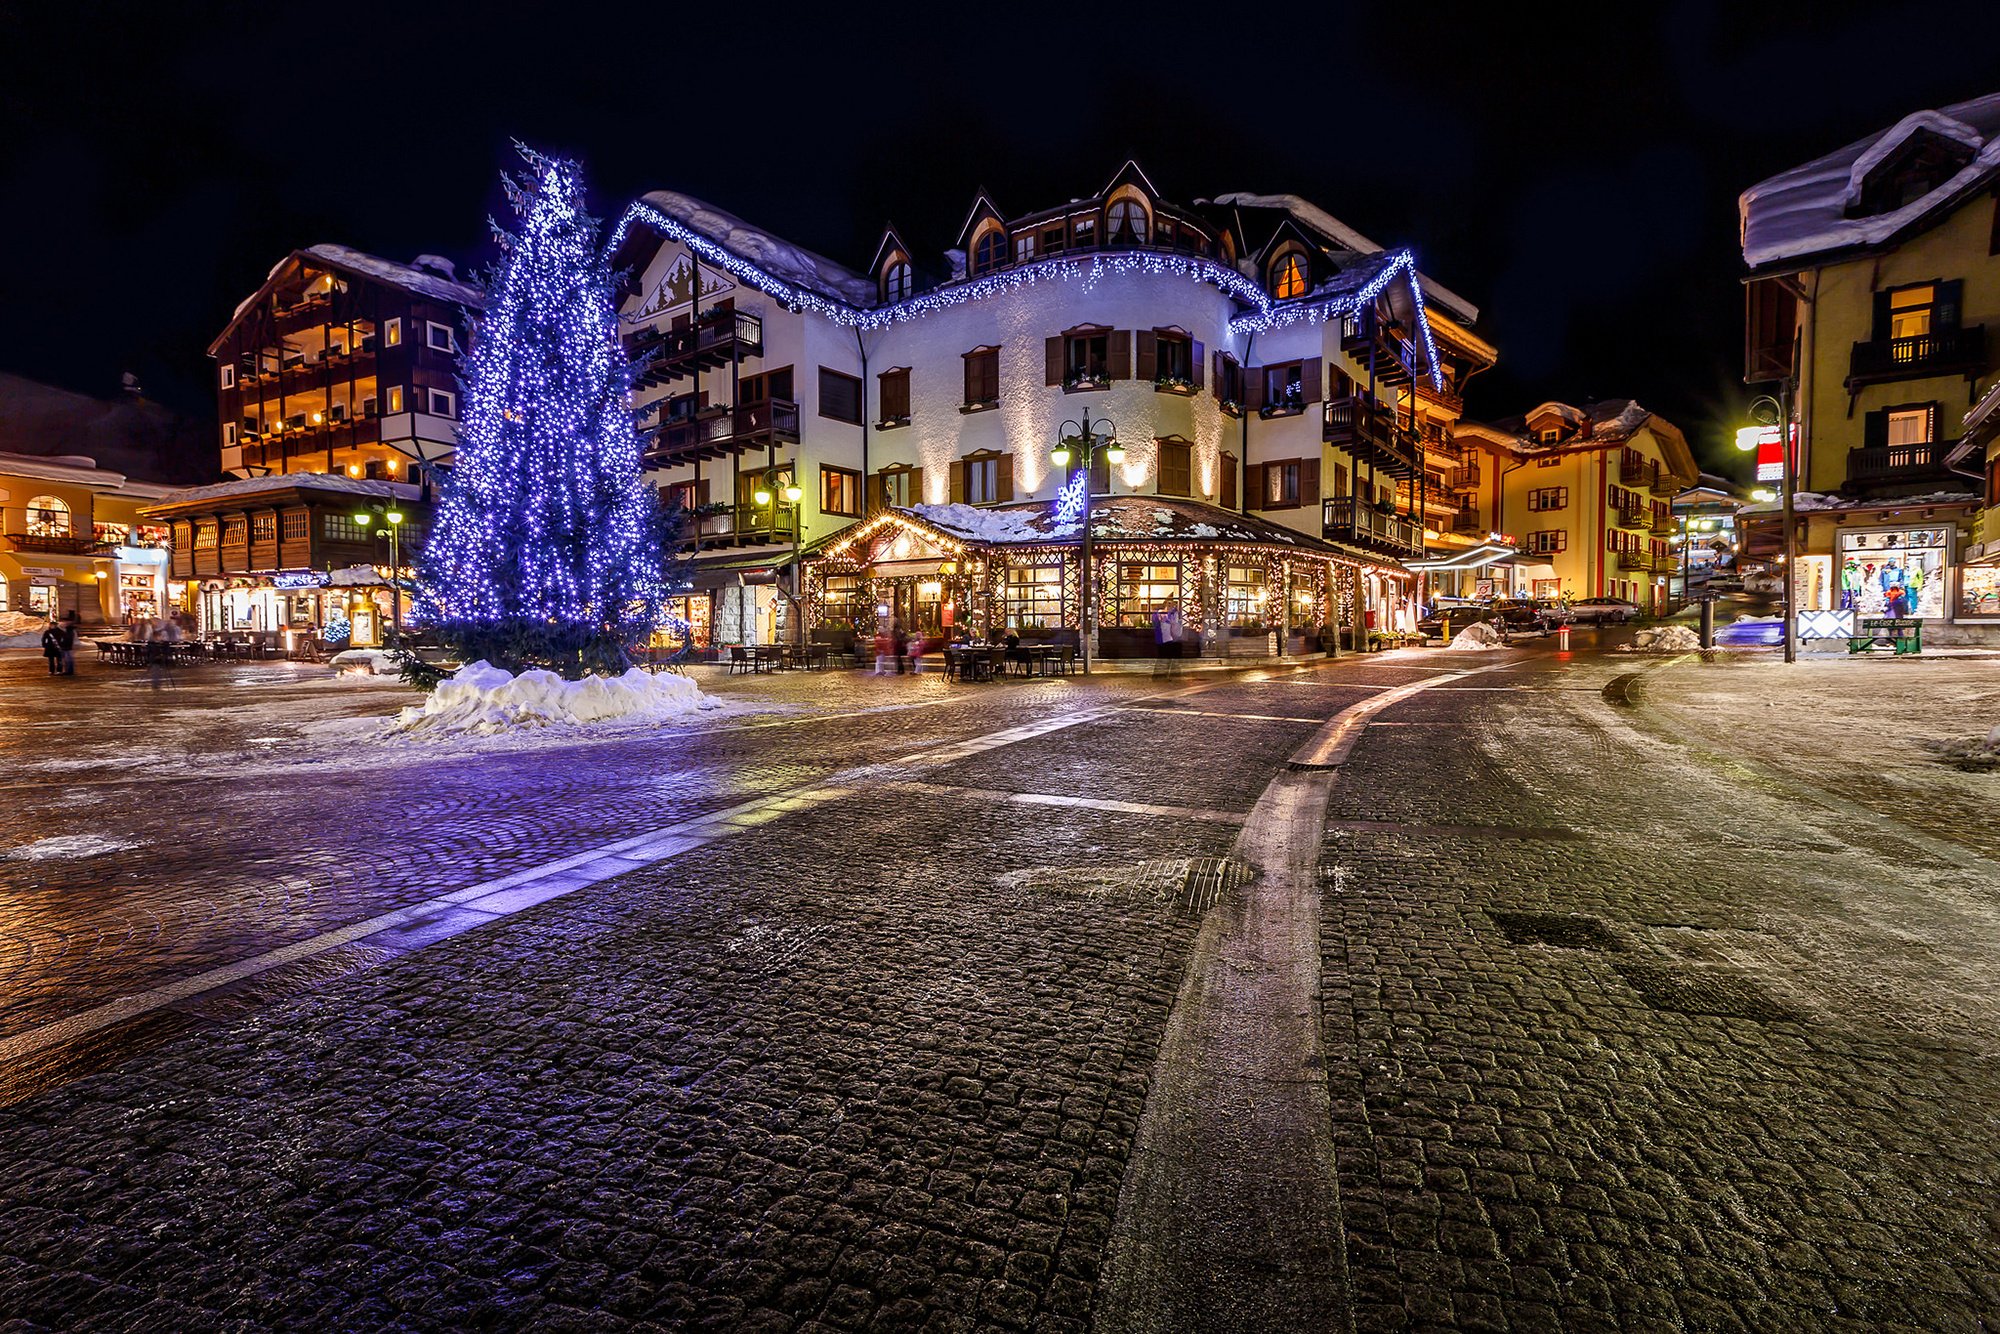 italy, Alps, Italia, Alpi, City, Night, Space, Tree, Garlands, Roads, Sidewalks, Houses, Shops, Cafes, Buildings, Christma, Downtown Wallpaper